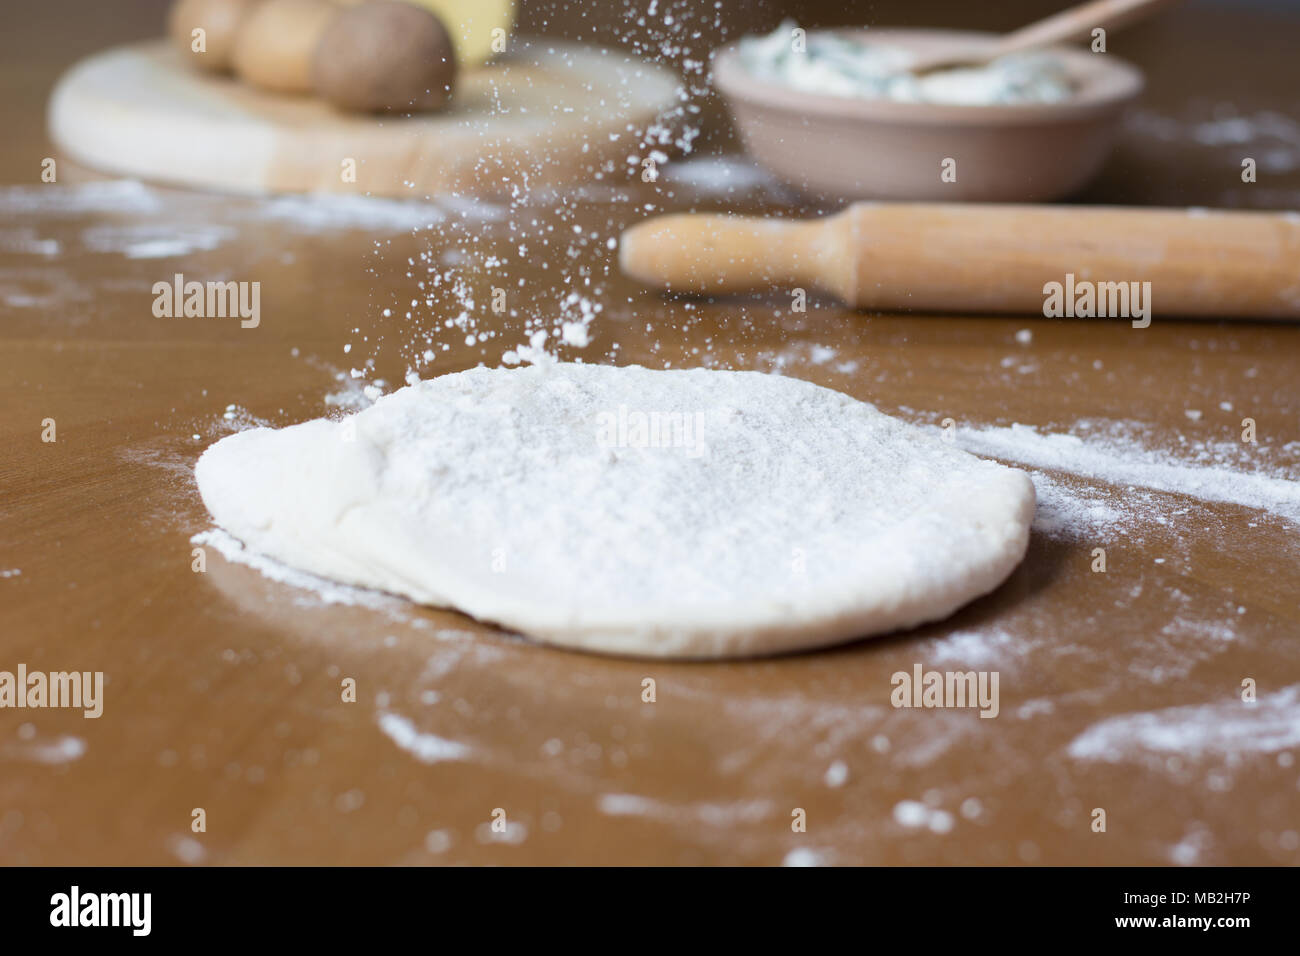 Making of Homemade cheese Pie or other kind of pastry appetizer or sweets on a backing Tray. Stock Photo